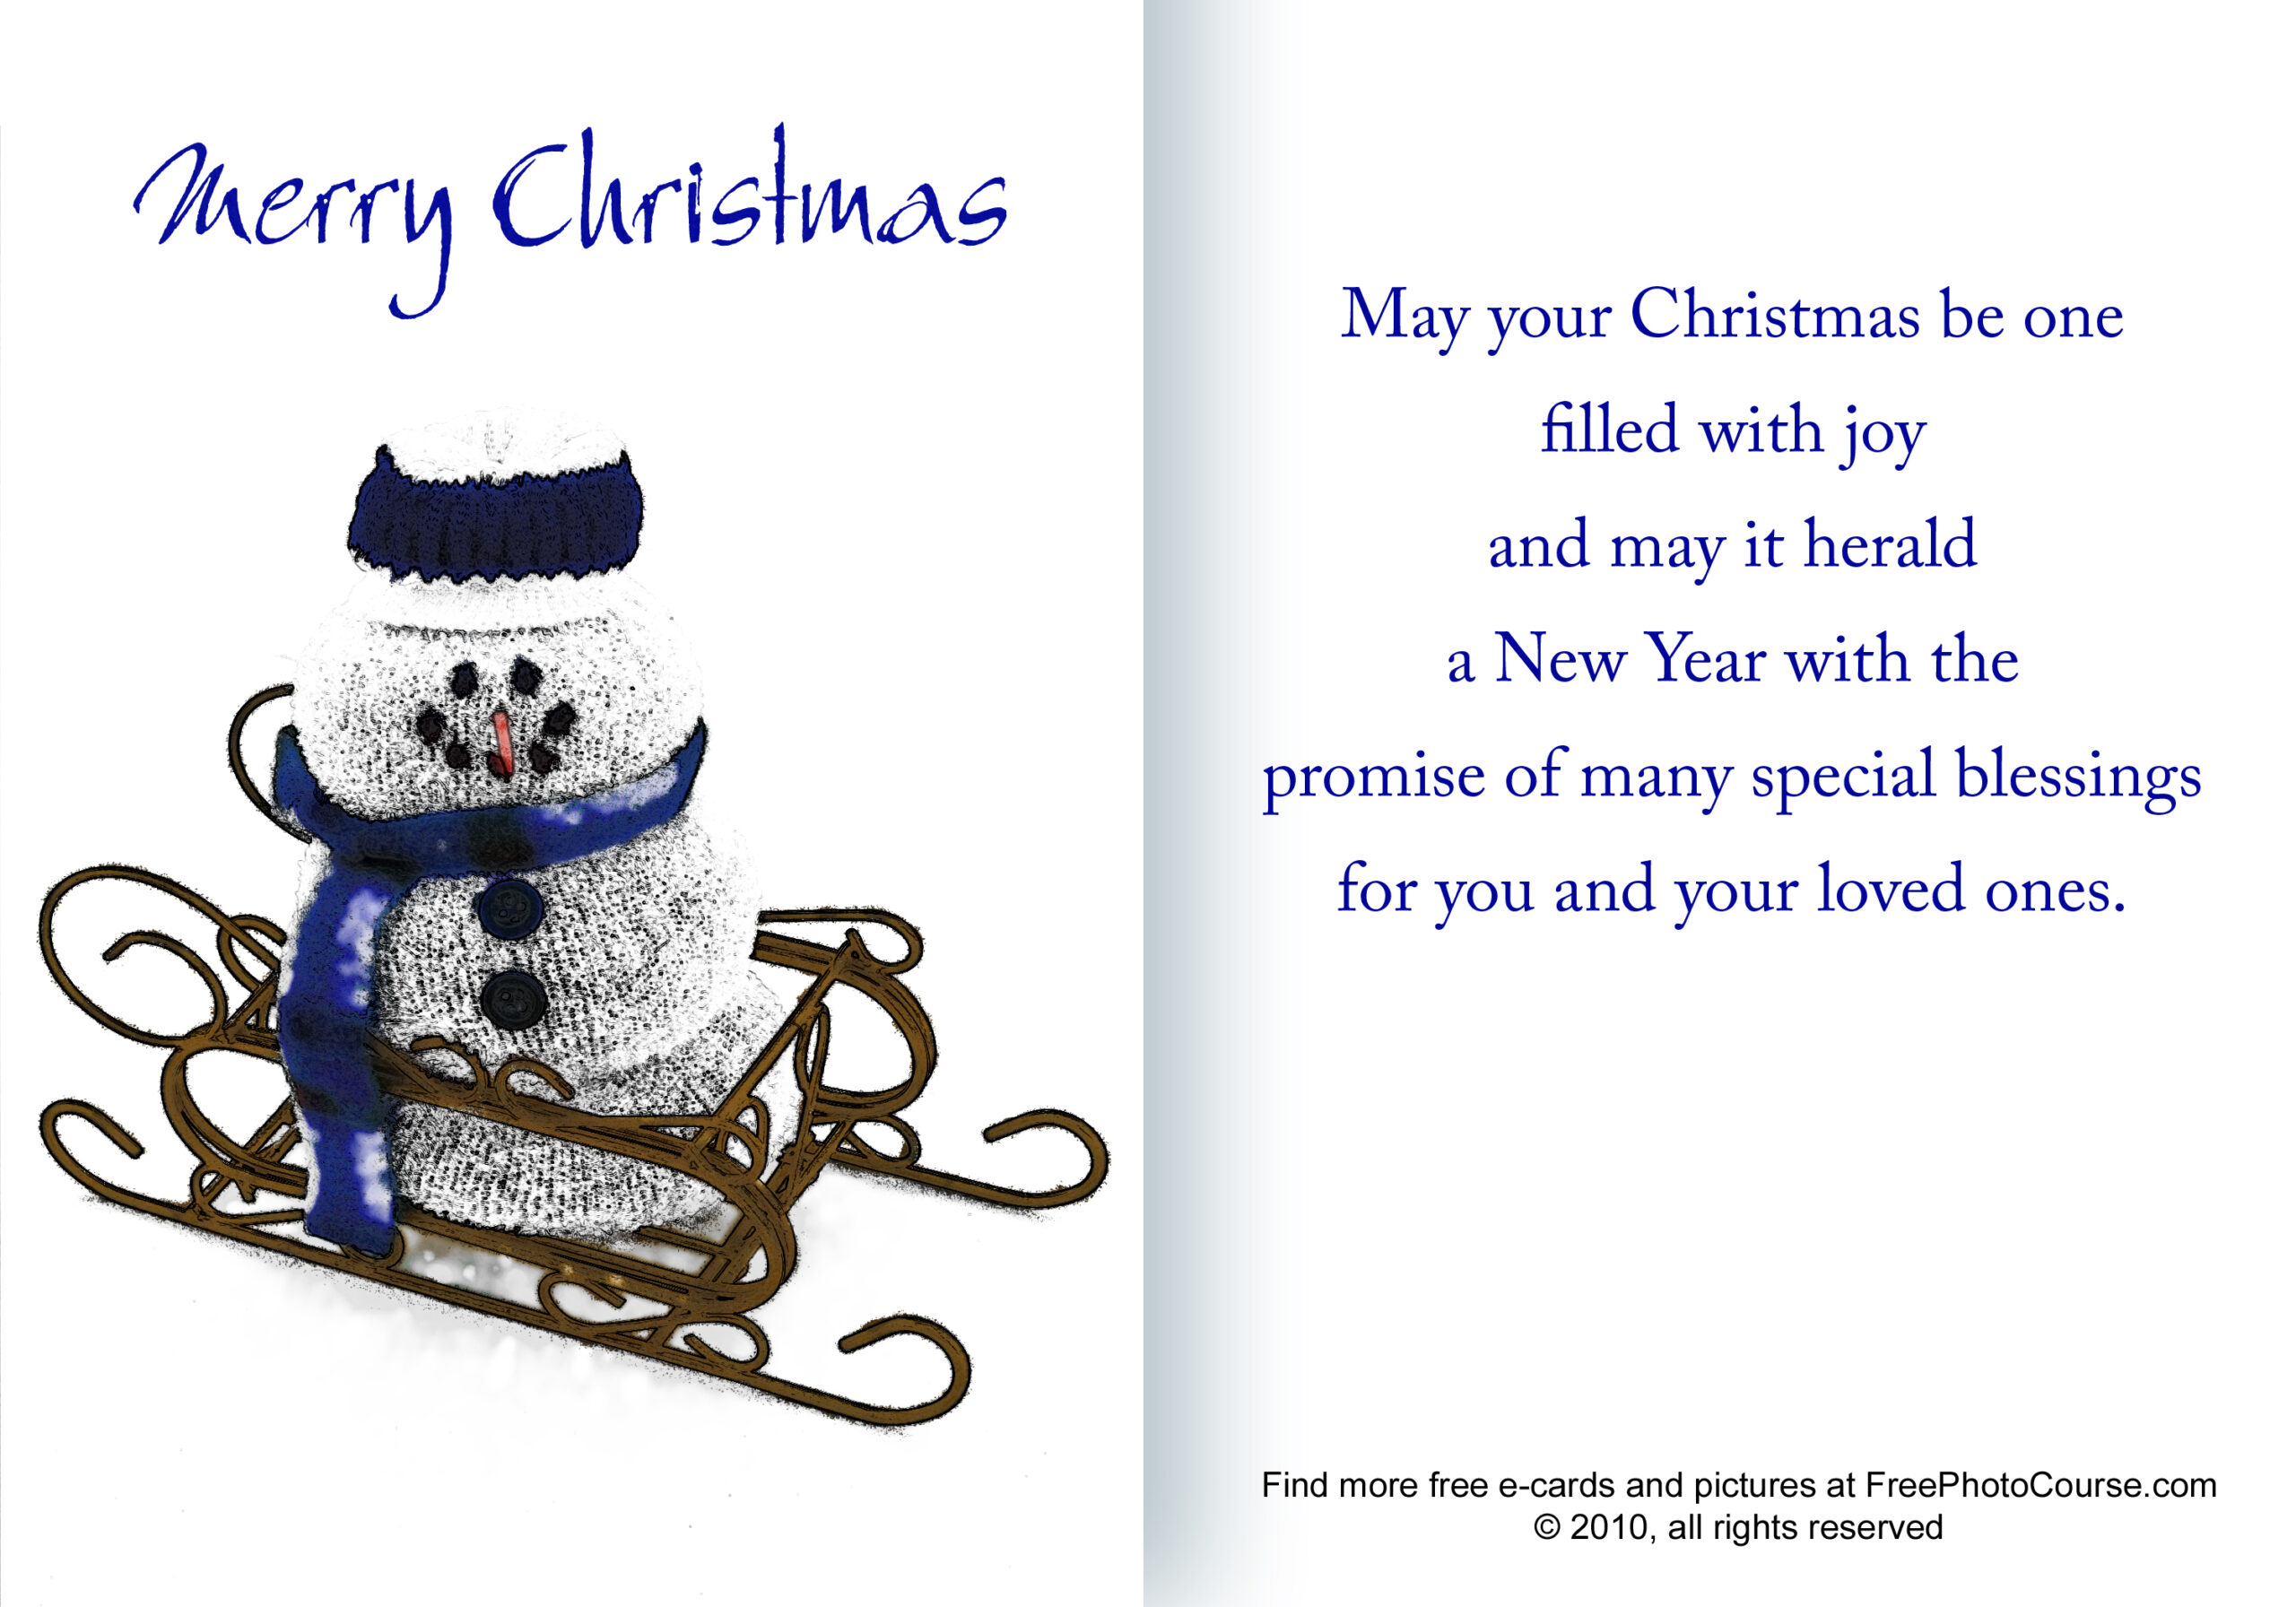 Free Christmas And Holiday Cards And Pictures - Free Printable Christmas Cards To Download